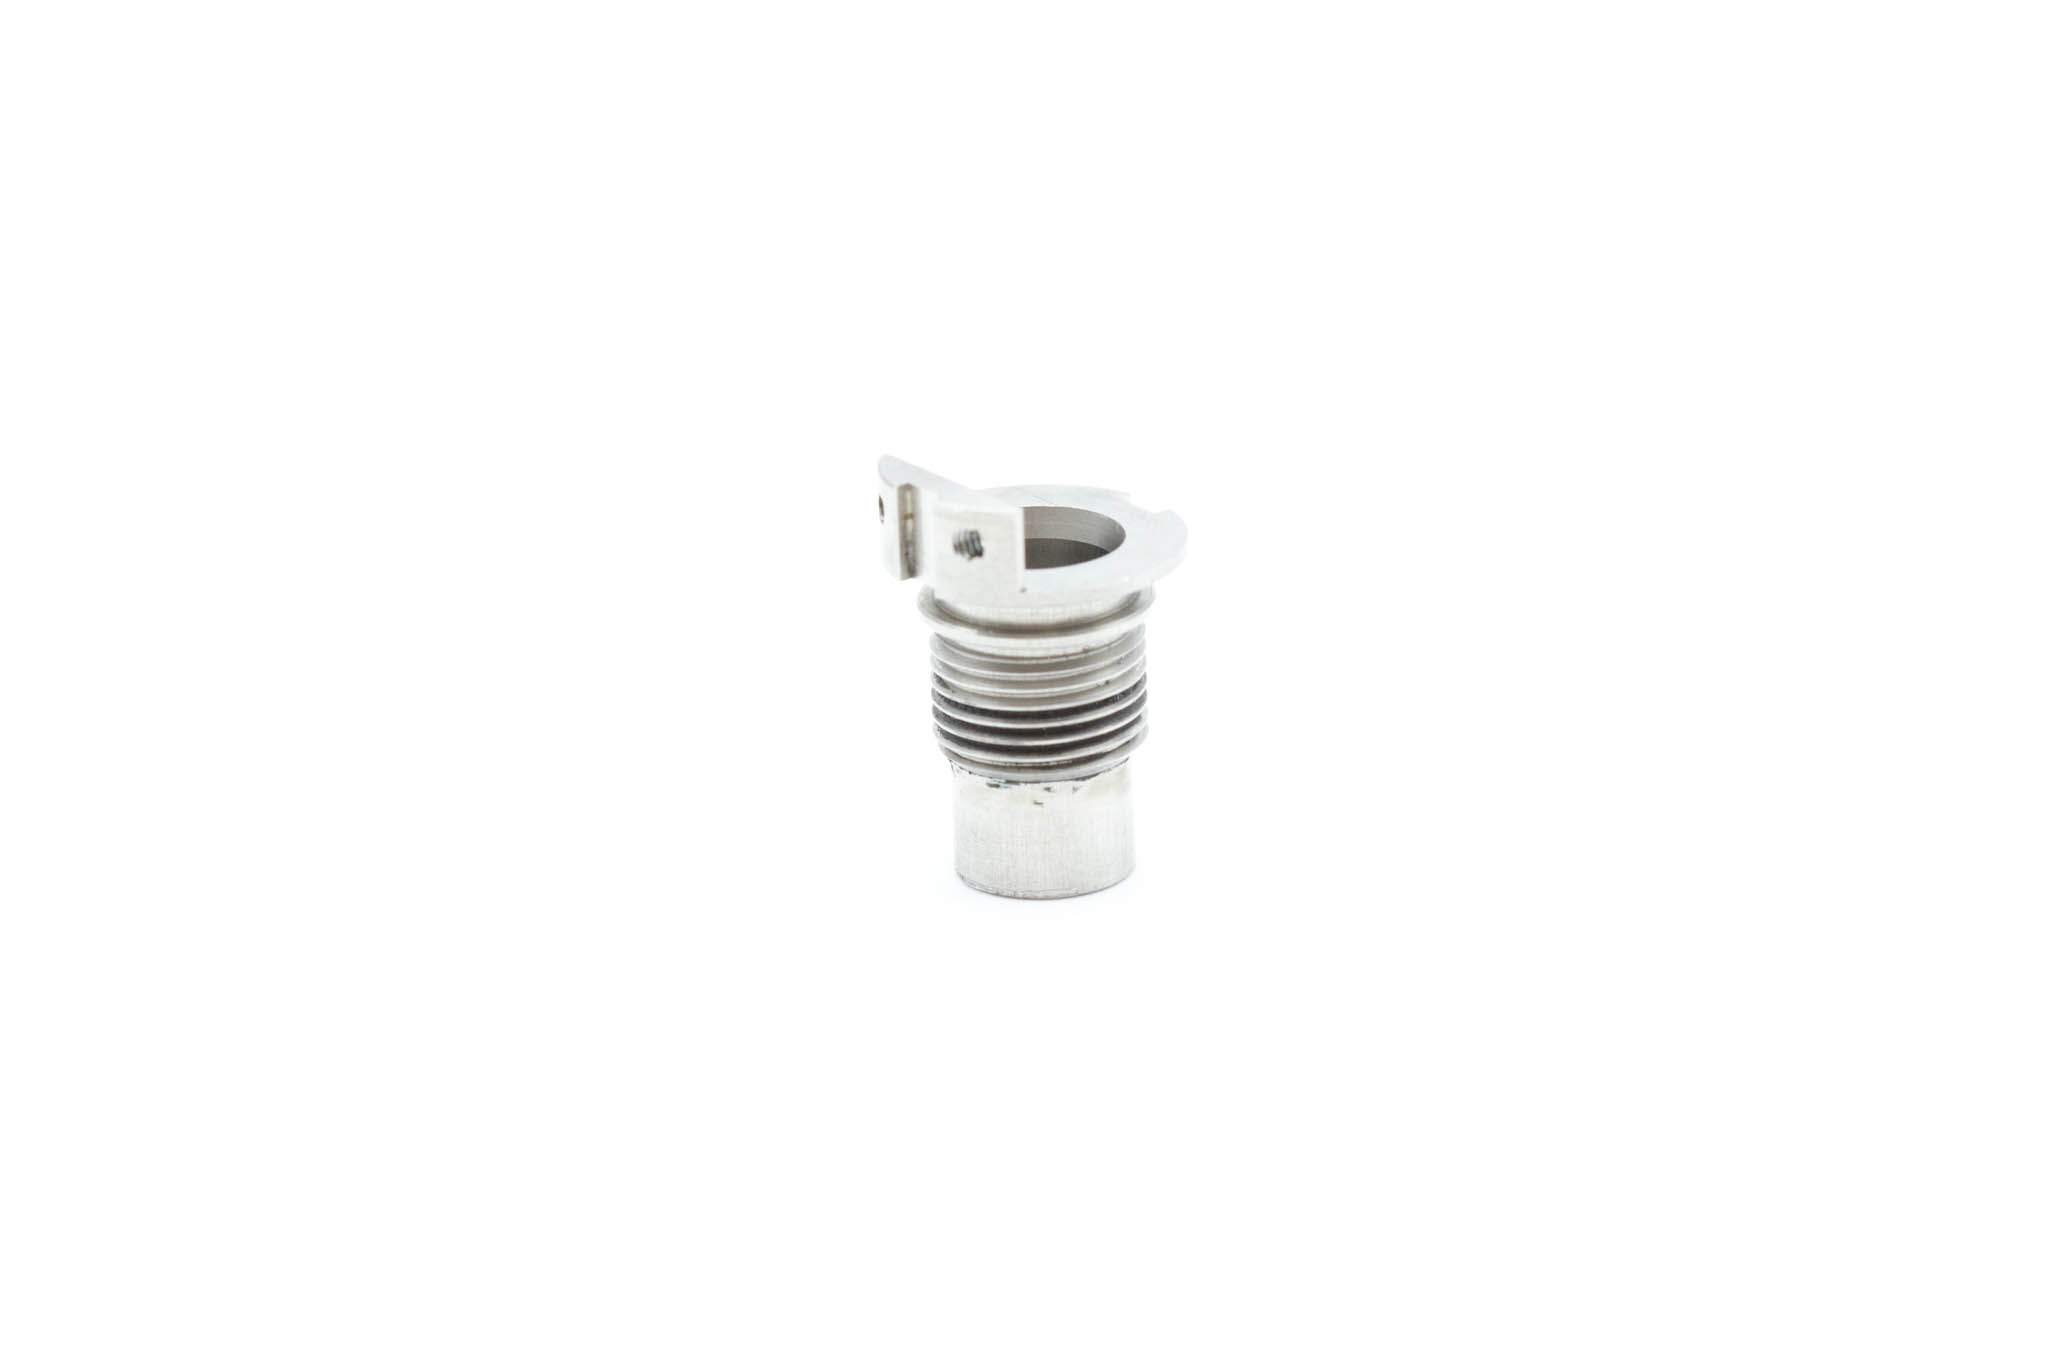 OEM Insertion Tube Connecting Ring - BF-1T60, BF-XP60, BF-MP160F